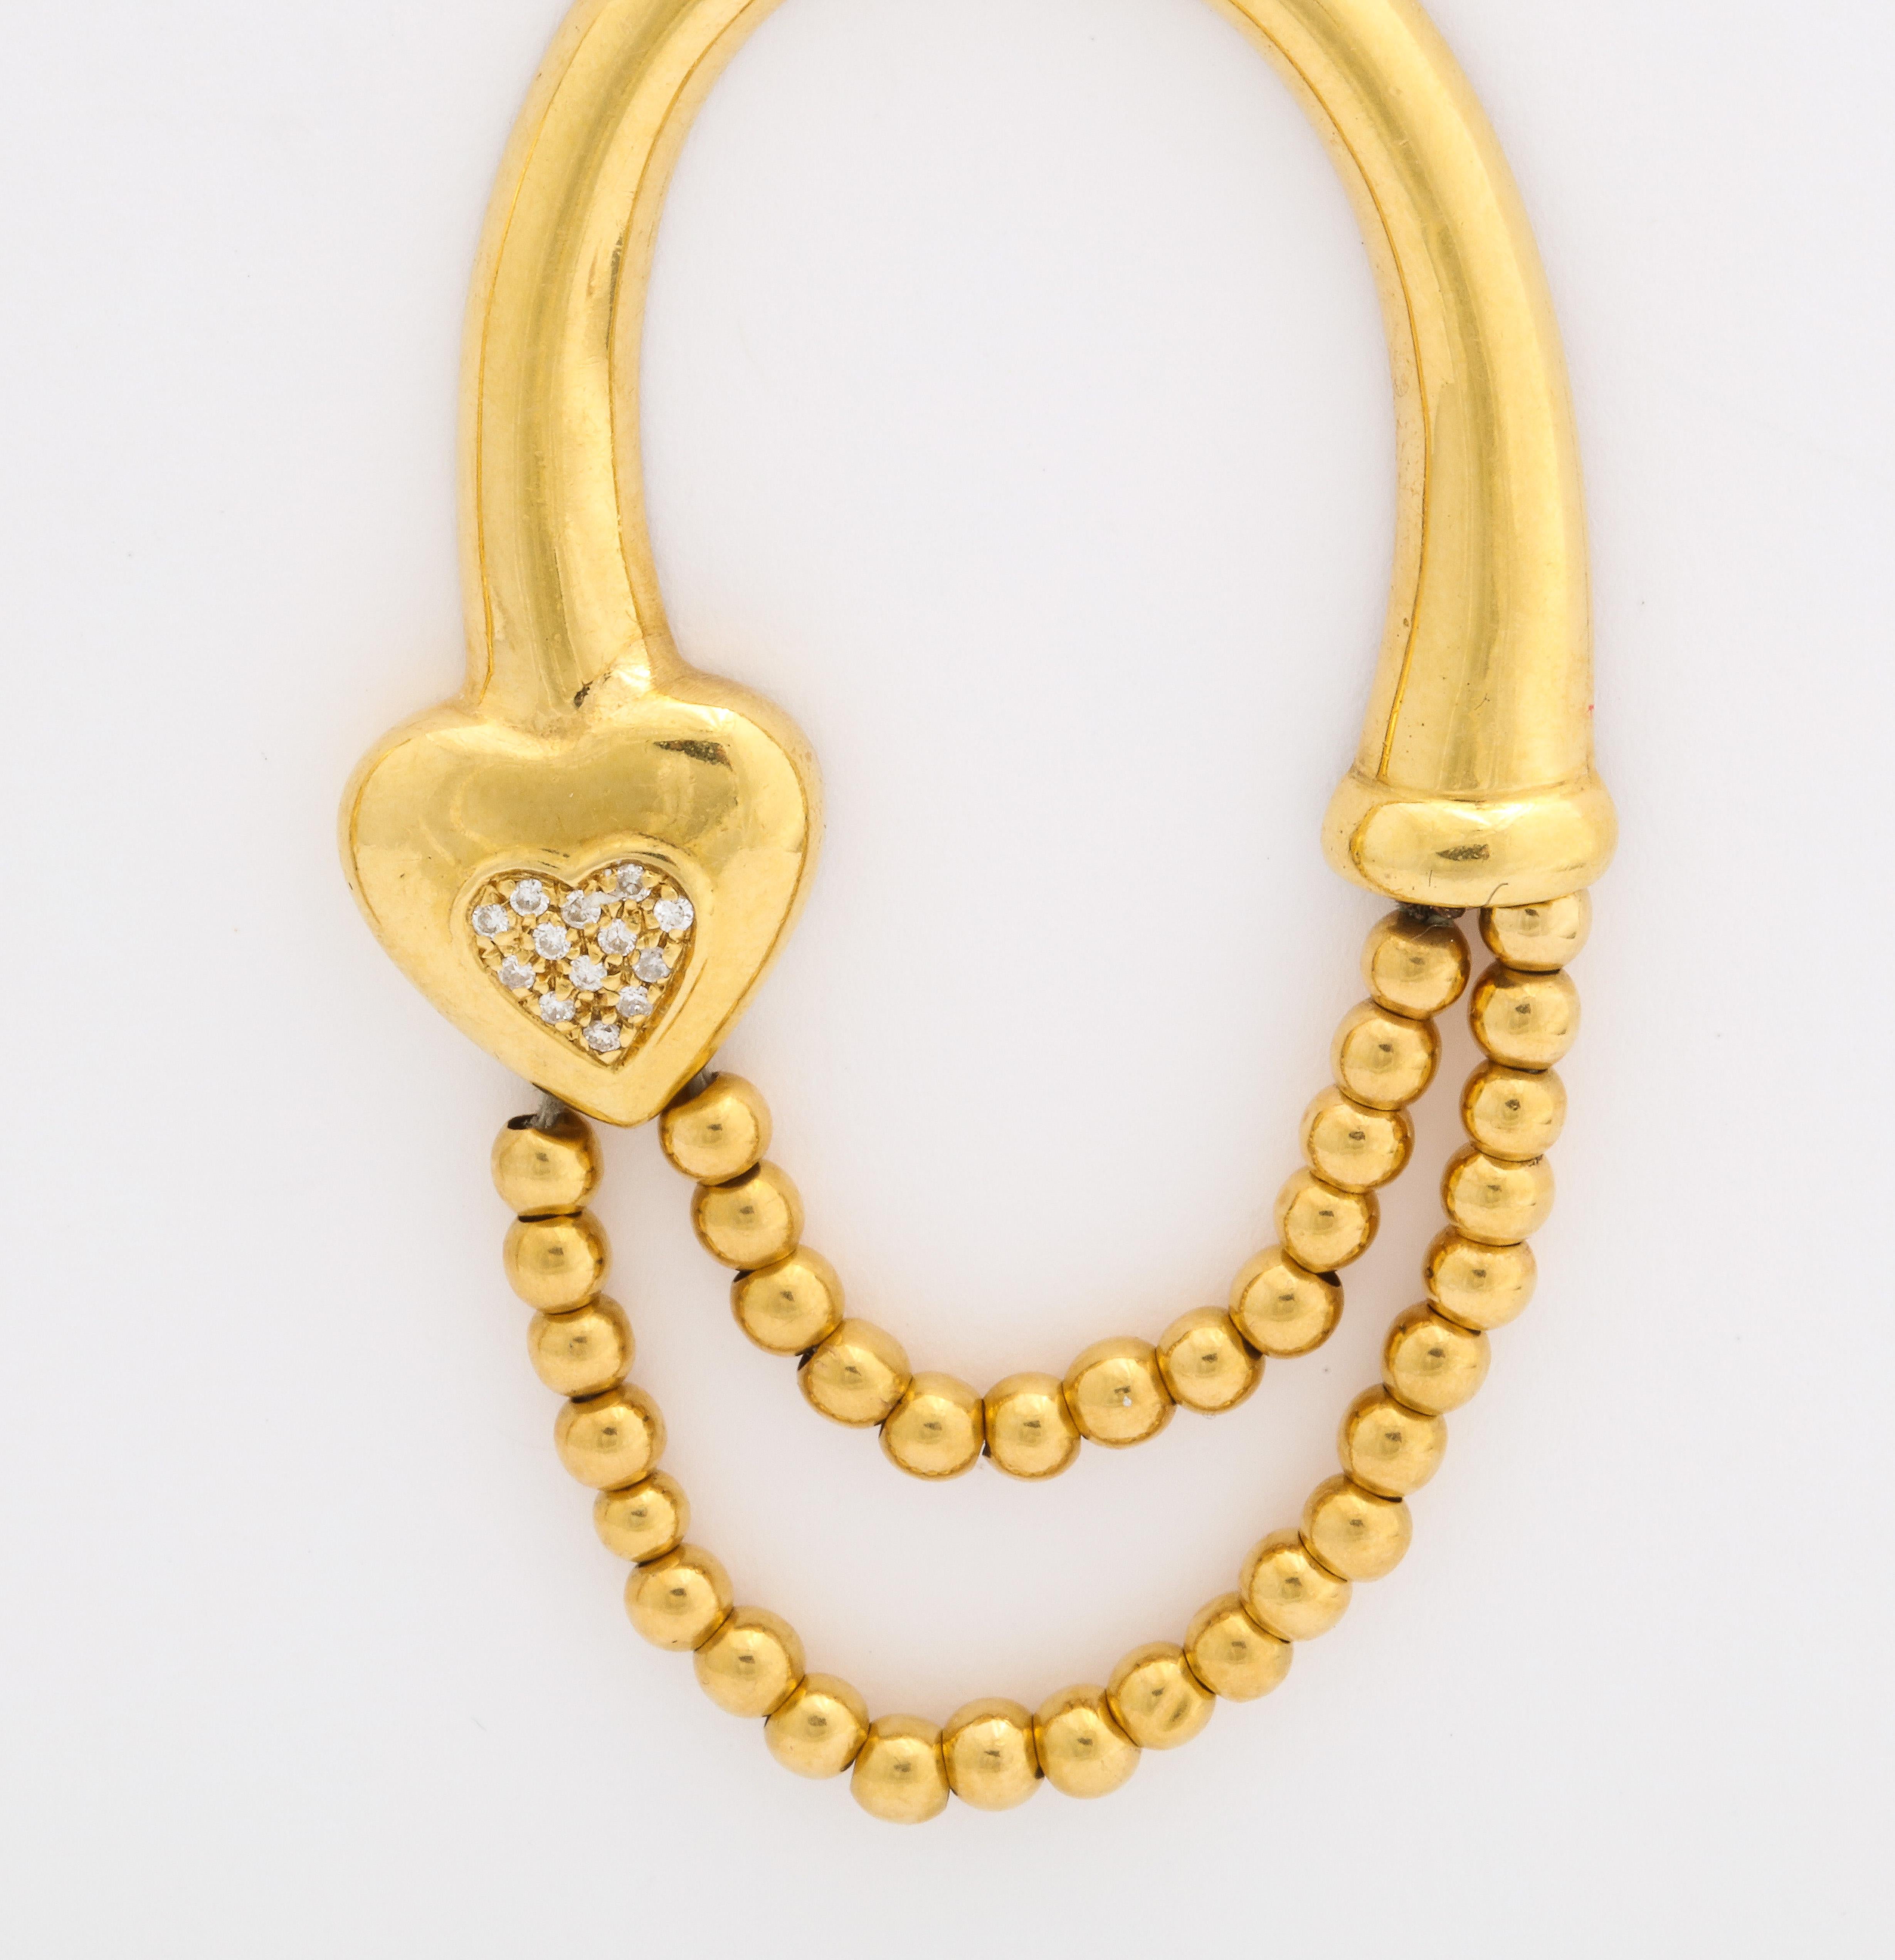 A Highly Styled pair of 18k Gold Bead Hoop Earrings with Diamond Hearts.   There are small diamonds the heart as well as the ear post.  
These 18 K earrings have a very contemporary look and are day wearable.They can be both fun and serious.